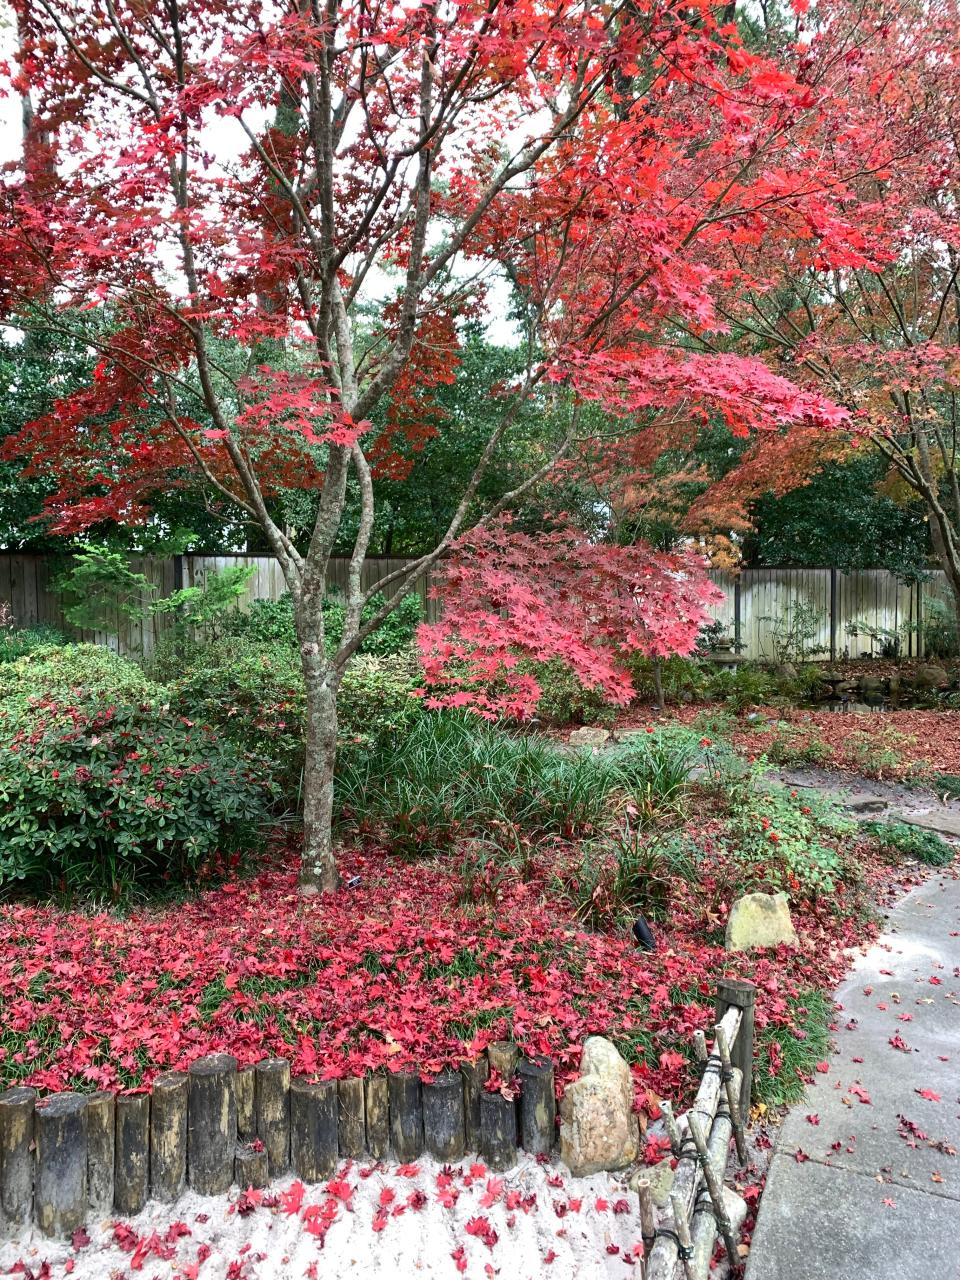 The fall foliage of some Japanese maples are a beautiful viva magenta color.